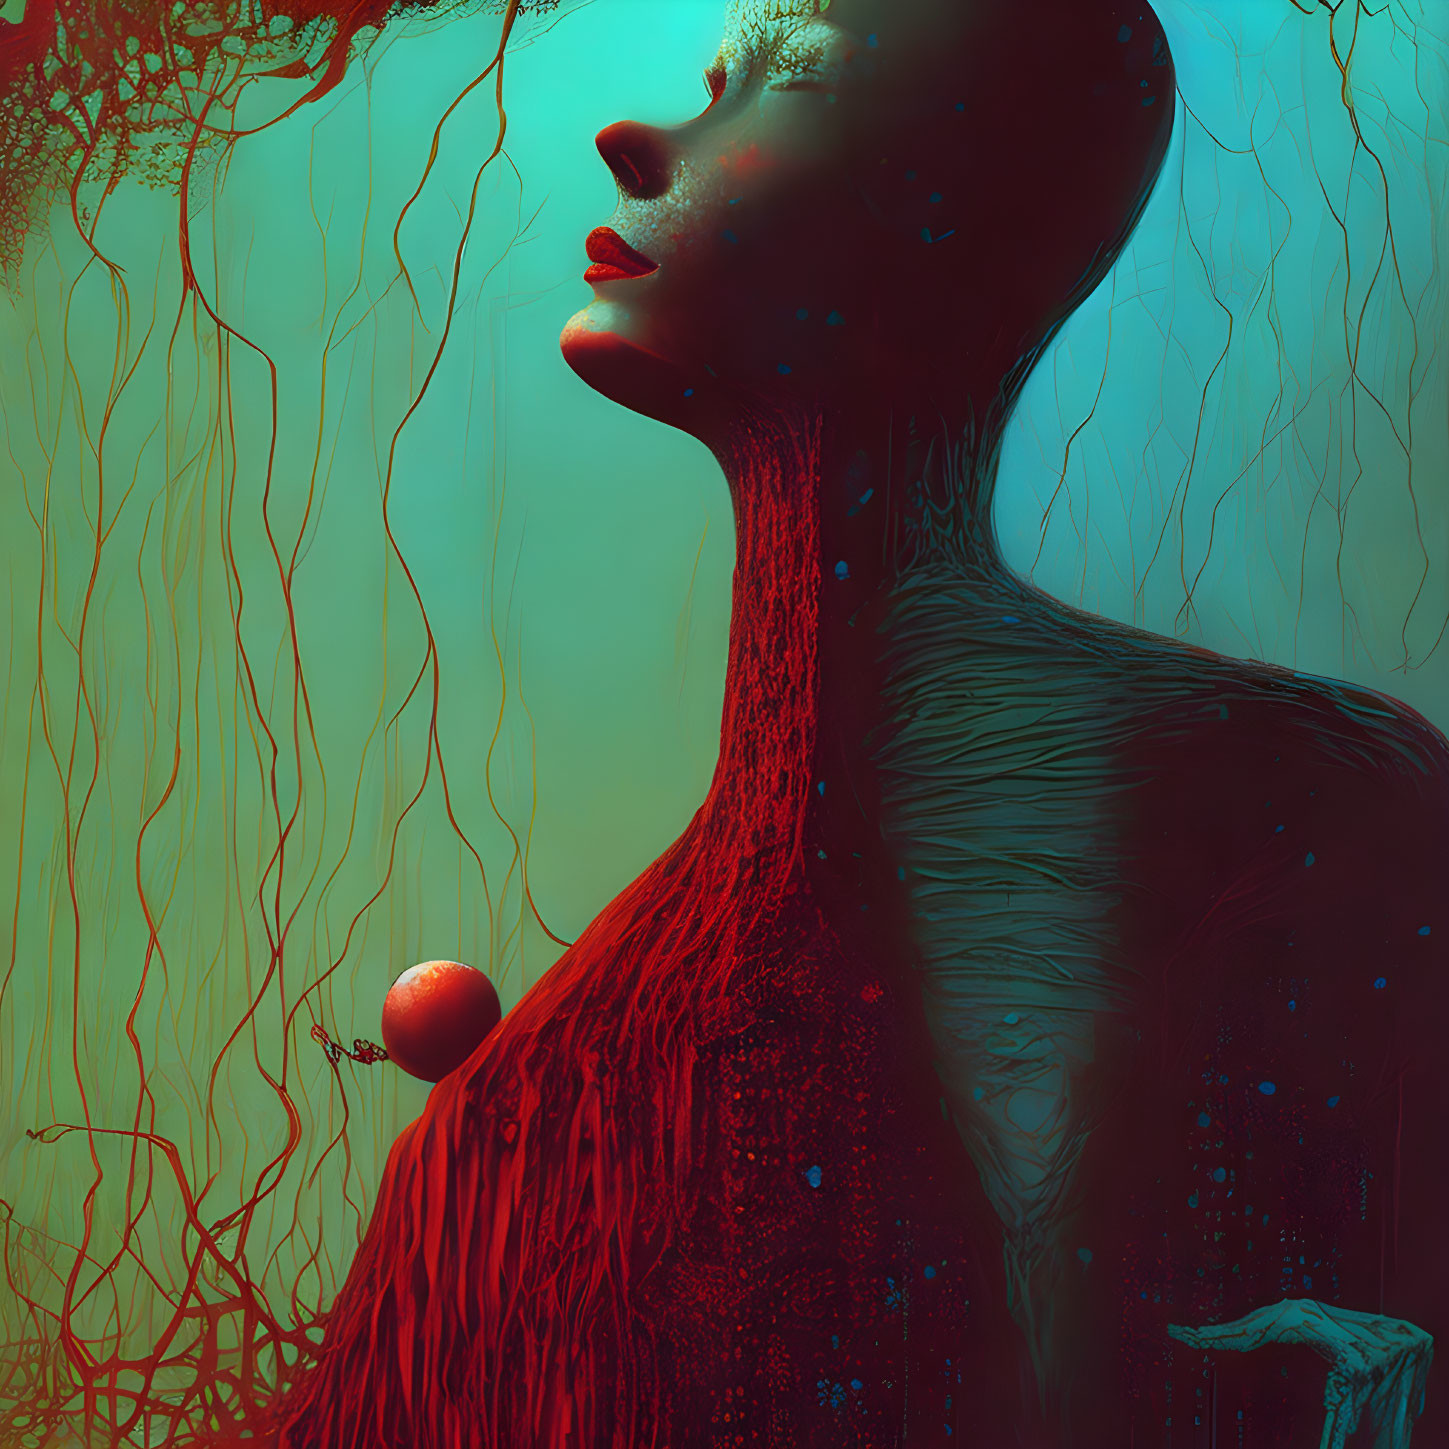 Surreal portrait featuring red textured neck, speckled skin, hanging roots, and orb.